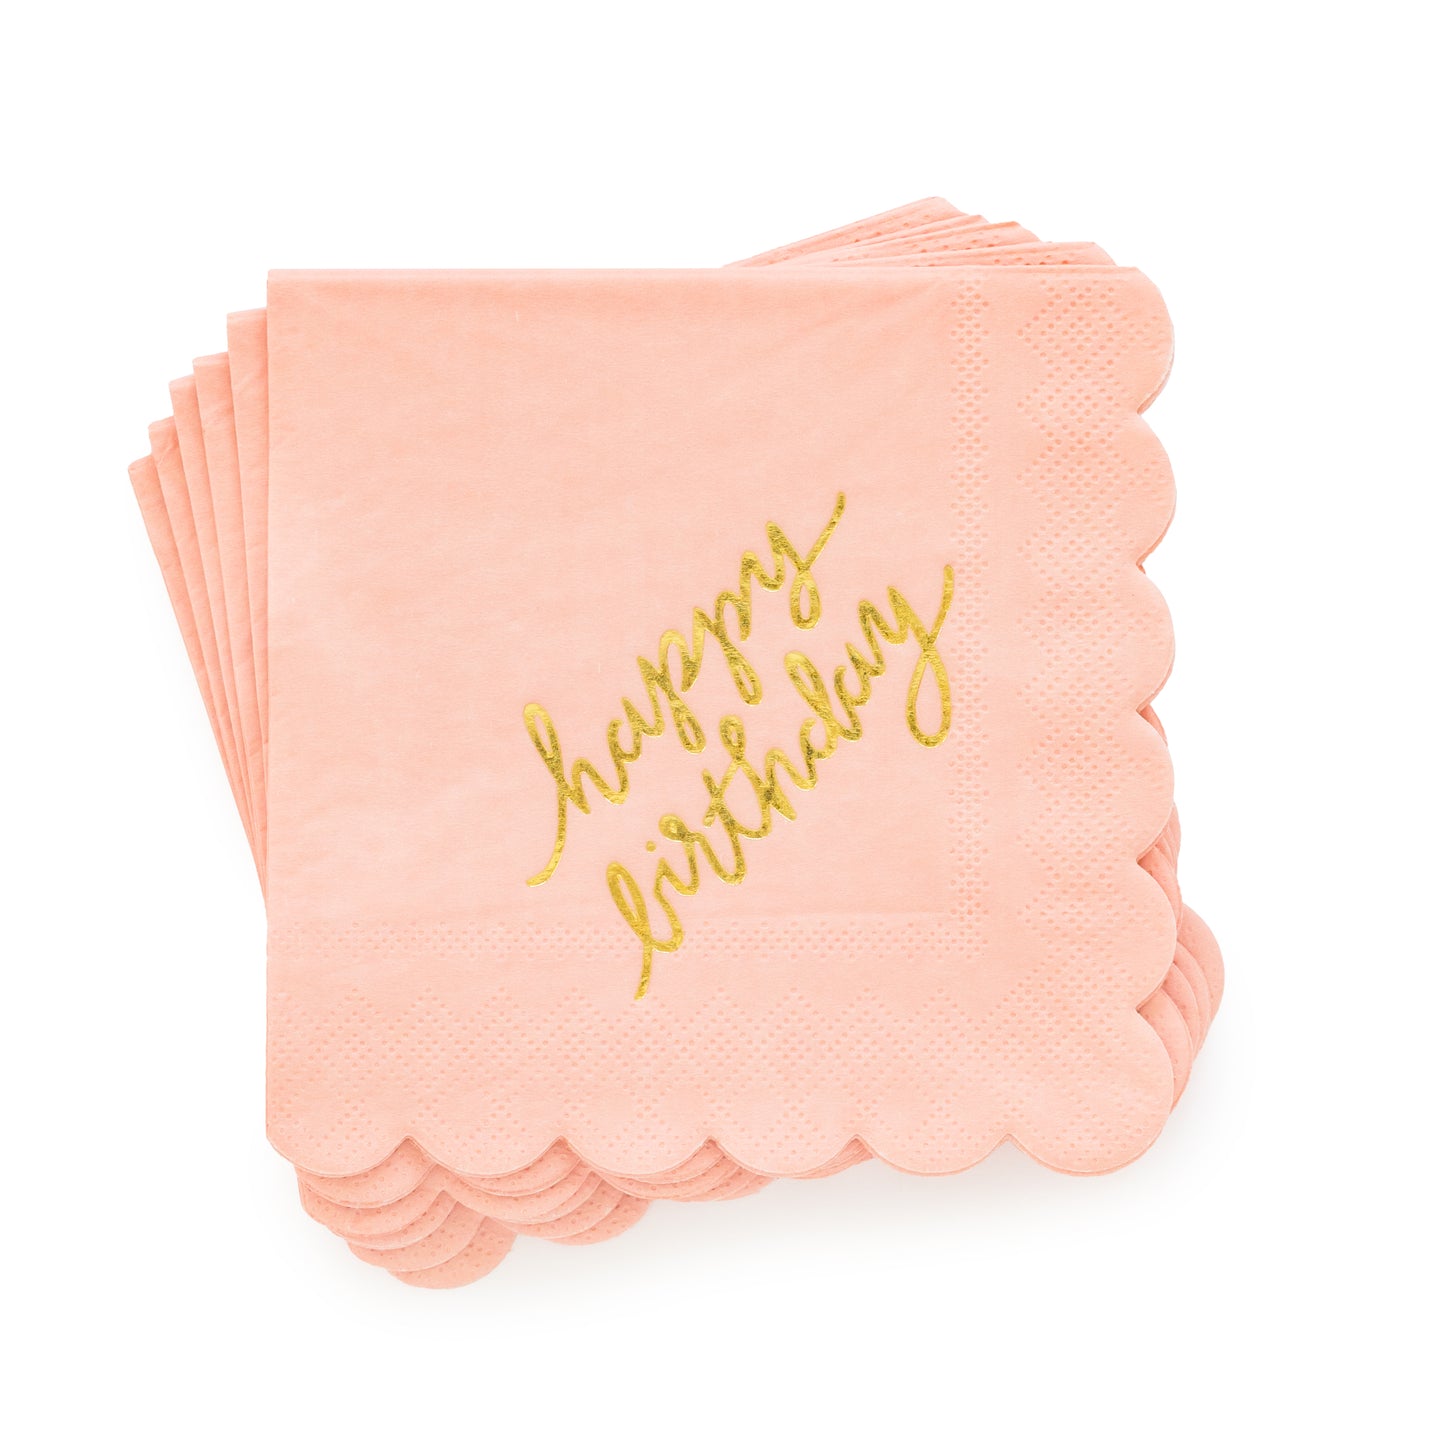 Pale pink scalloped edge cocktail napkins with gold foil happy birthday